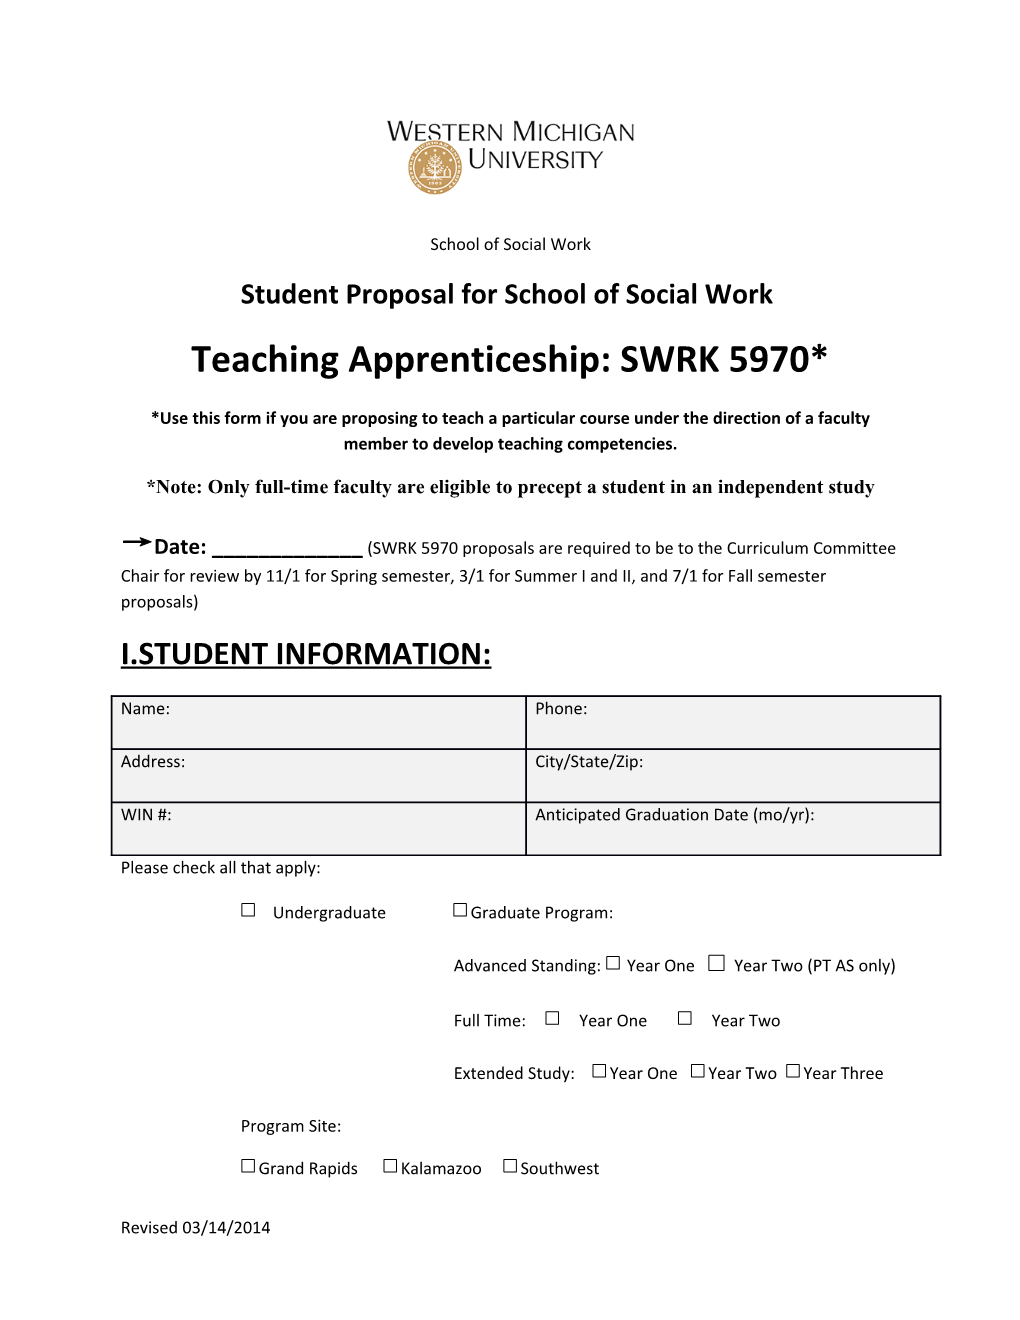 Student Proposal for School of Social Work